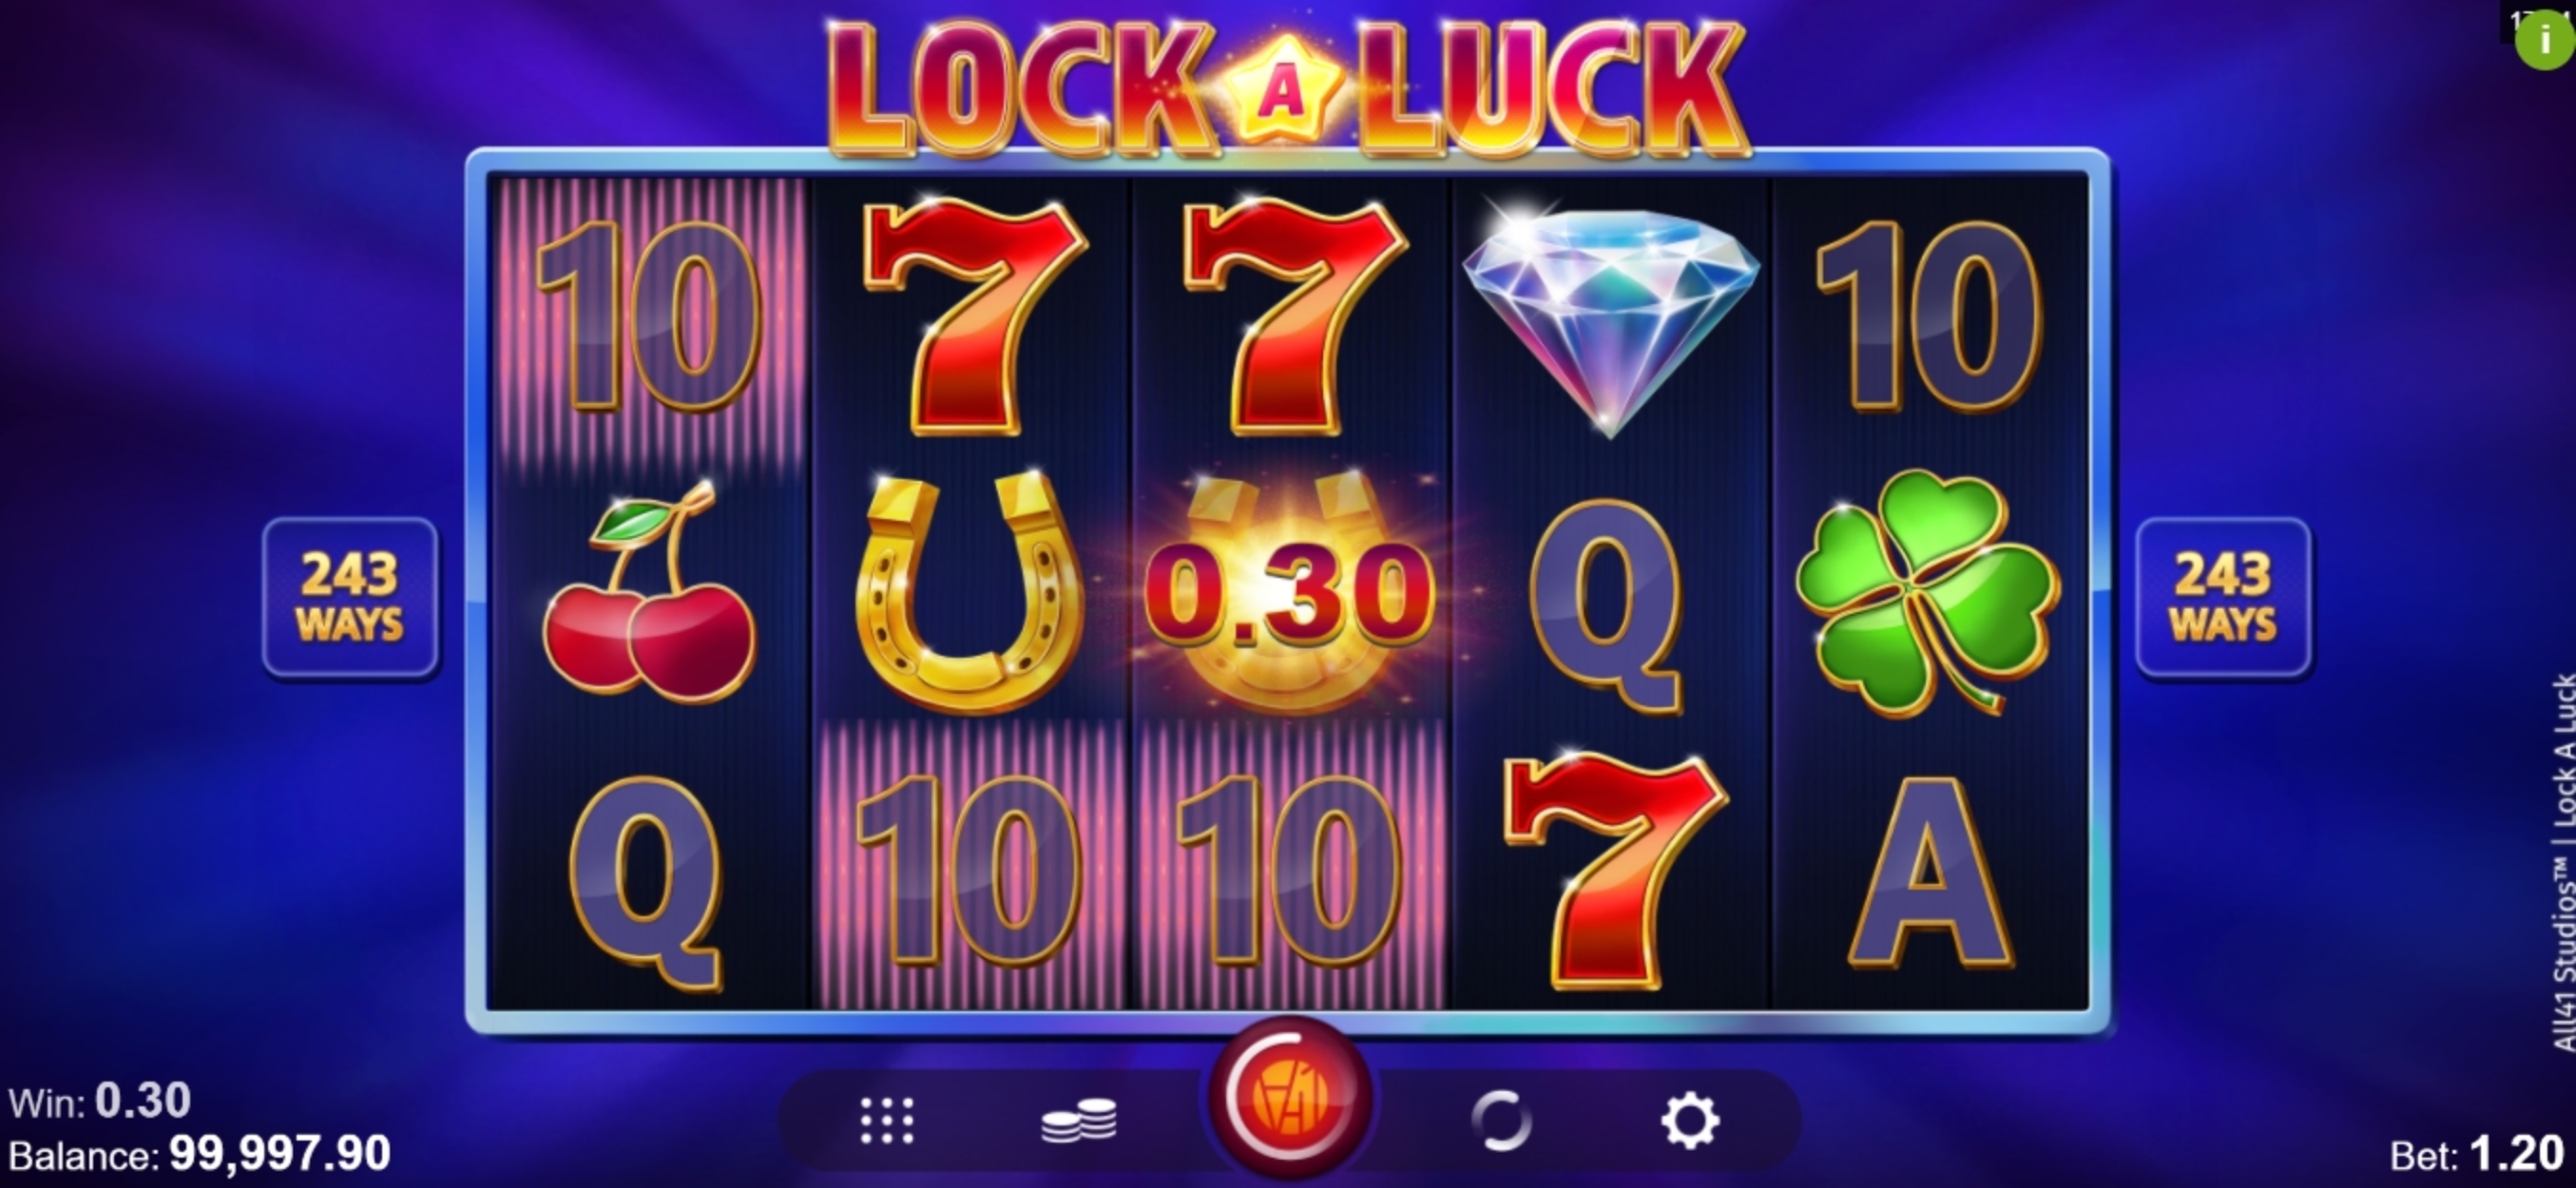 Win Money in Lock A Luck Free Slot Game by All41 Studios